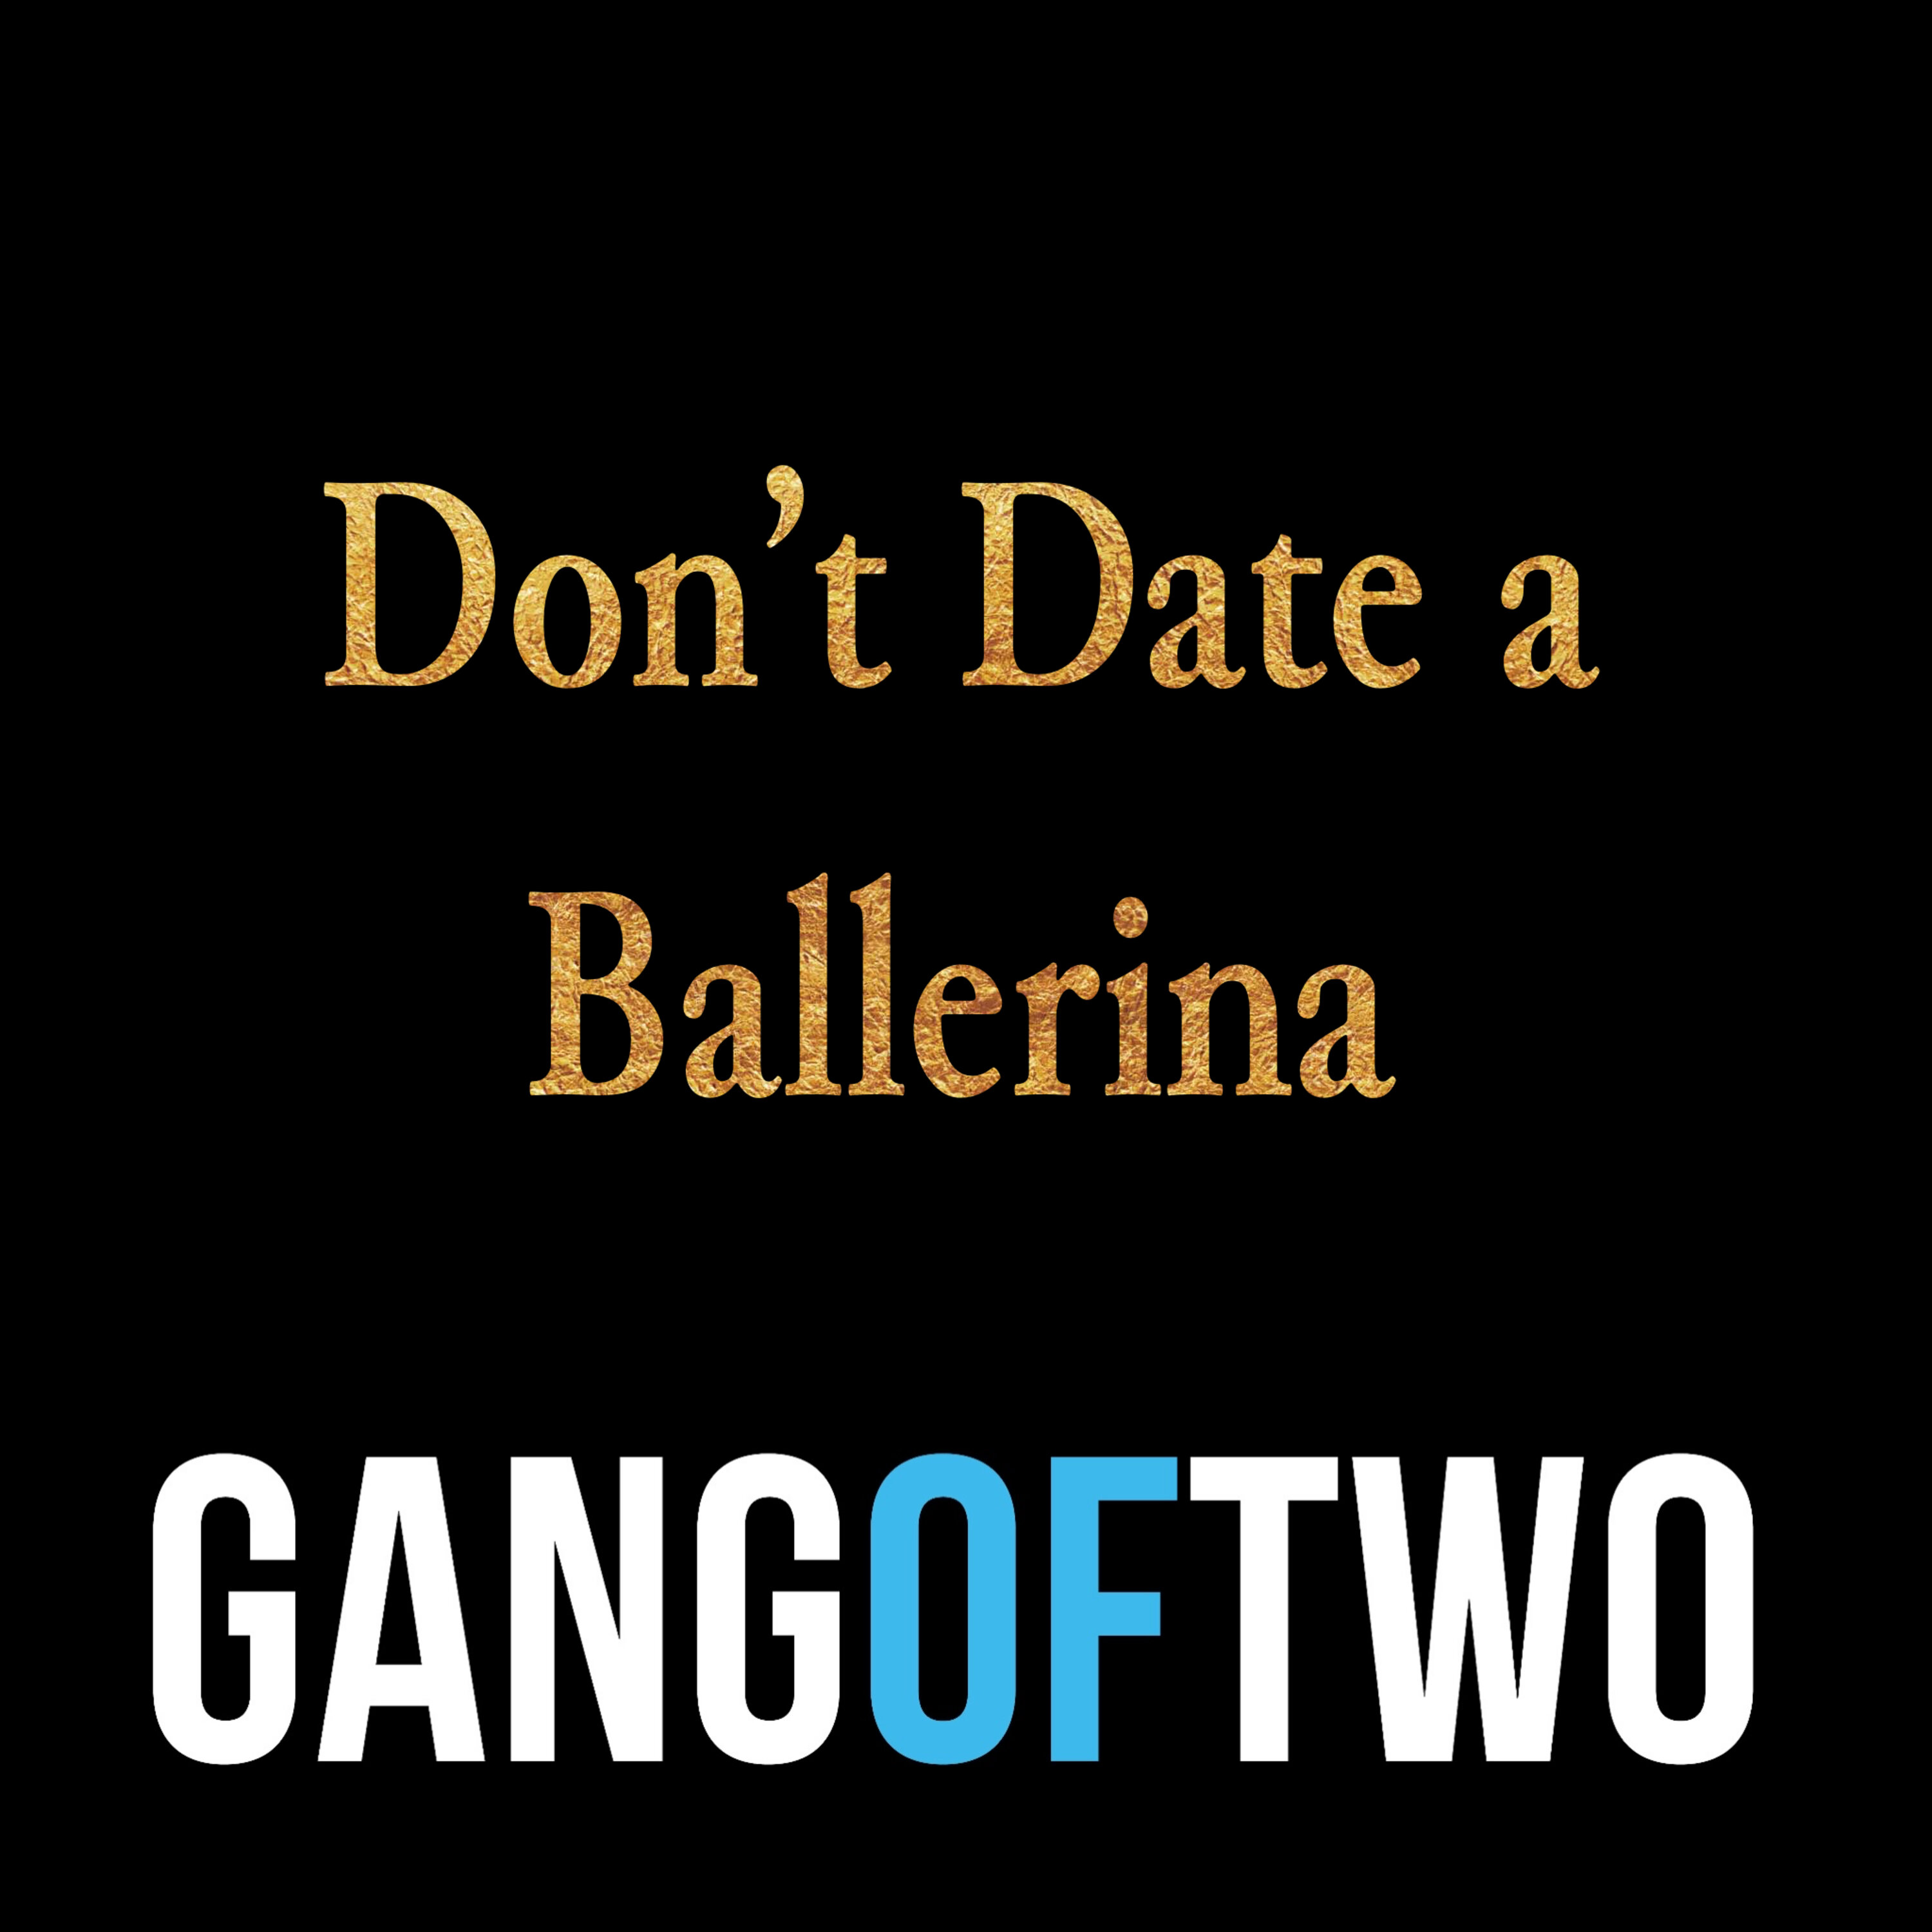 DON'T DATE A BALLERINA Image